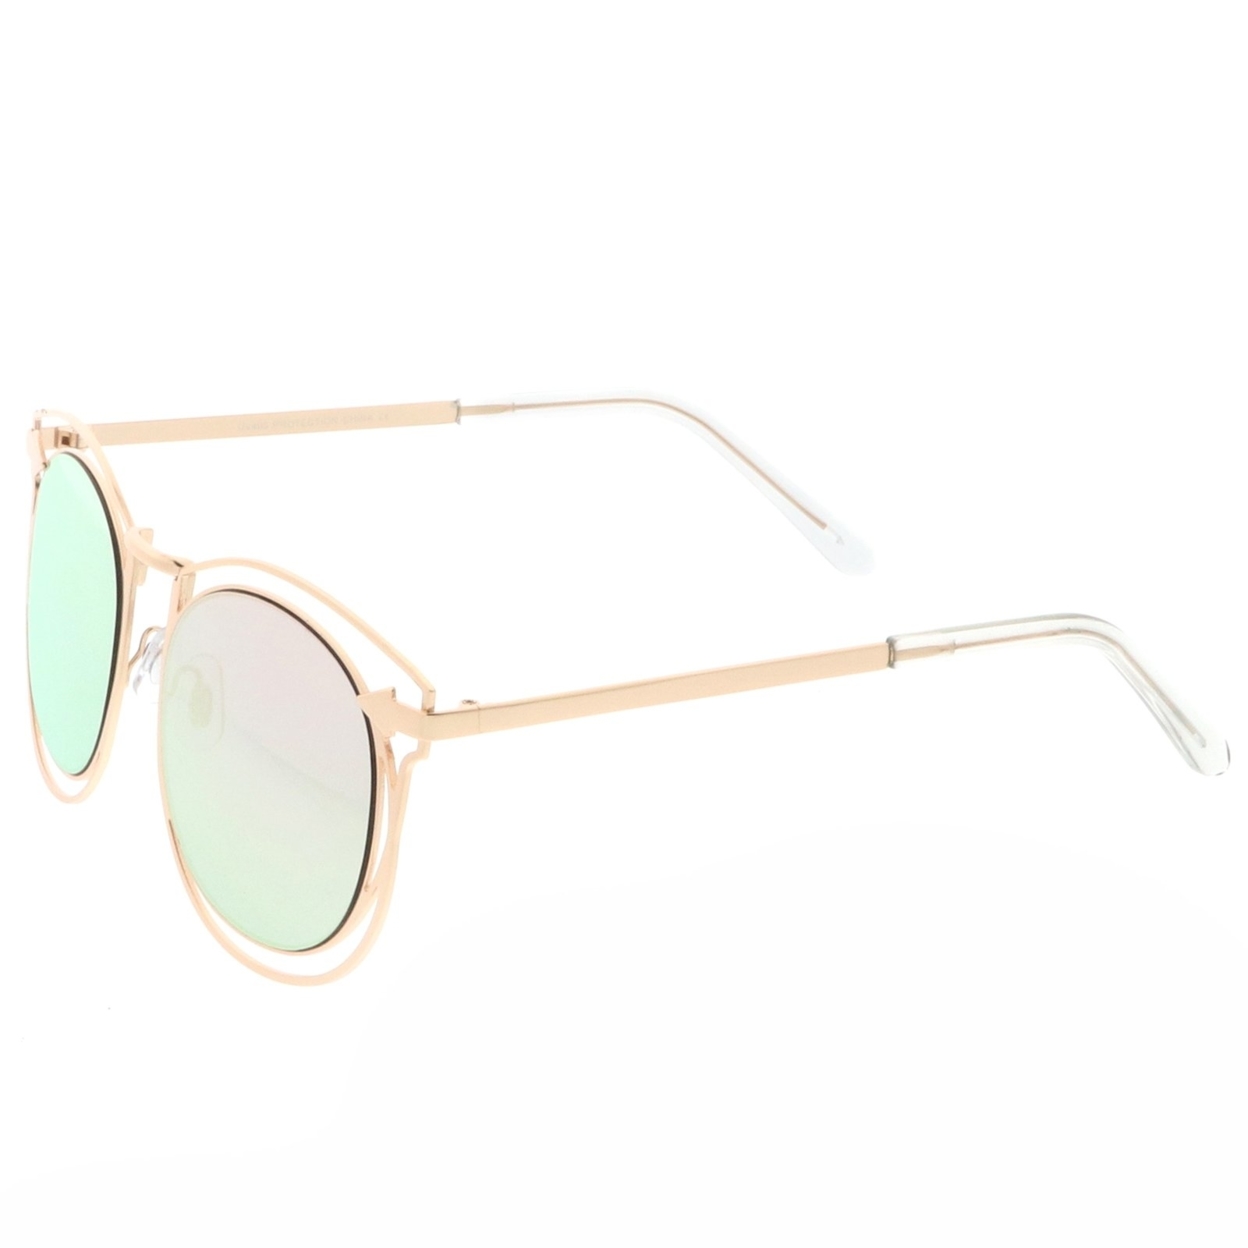 Oversize Open Metal Horn Rimmed Sunglasses With Arrow Design And Round Mirror Flat Lens 55mm - Gold / Pink Mirror